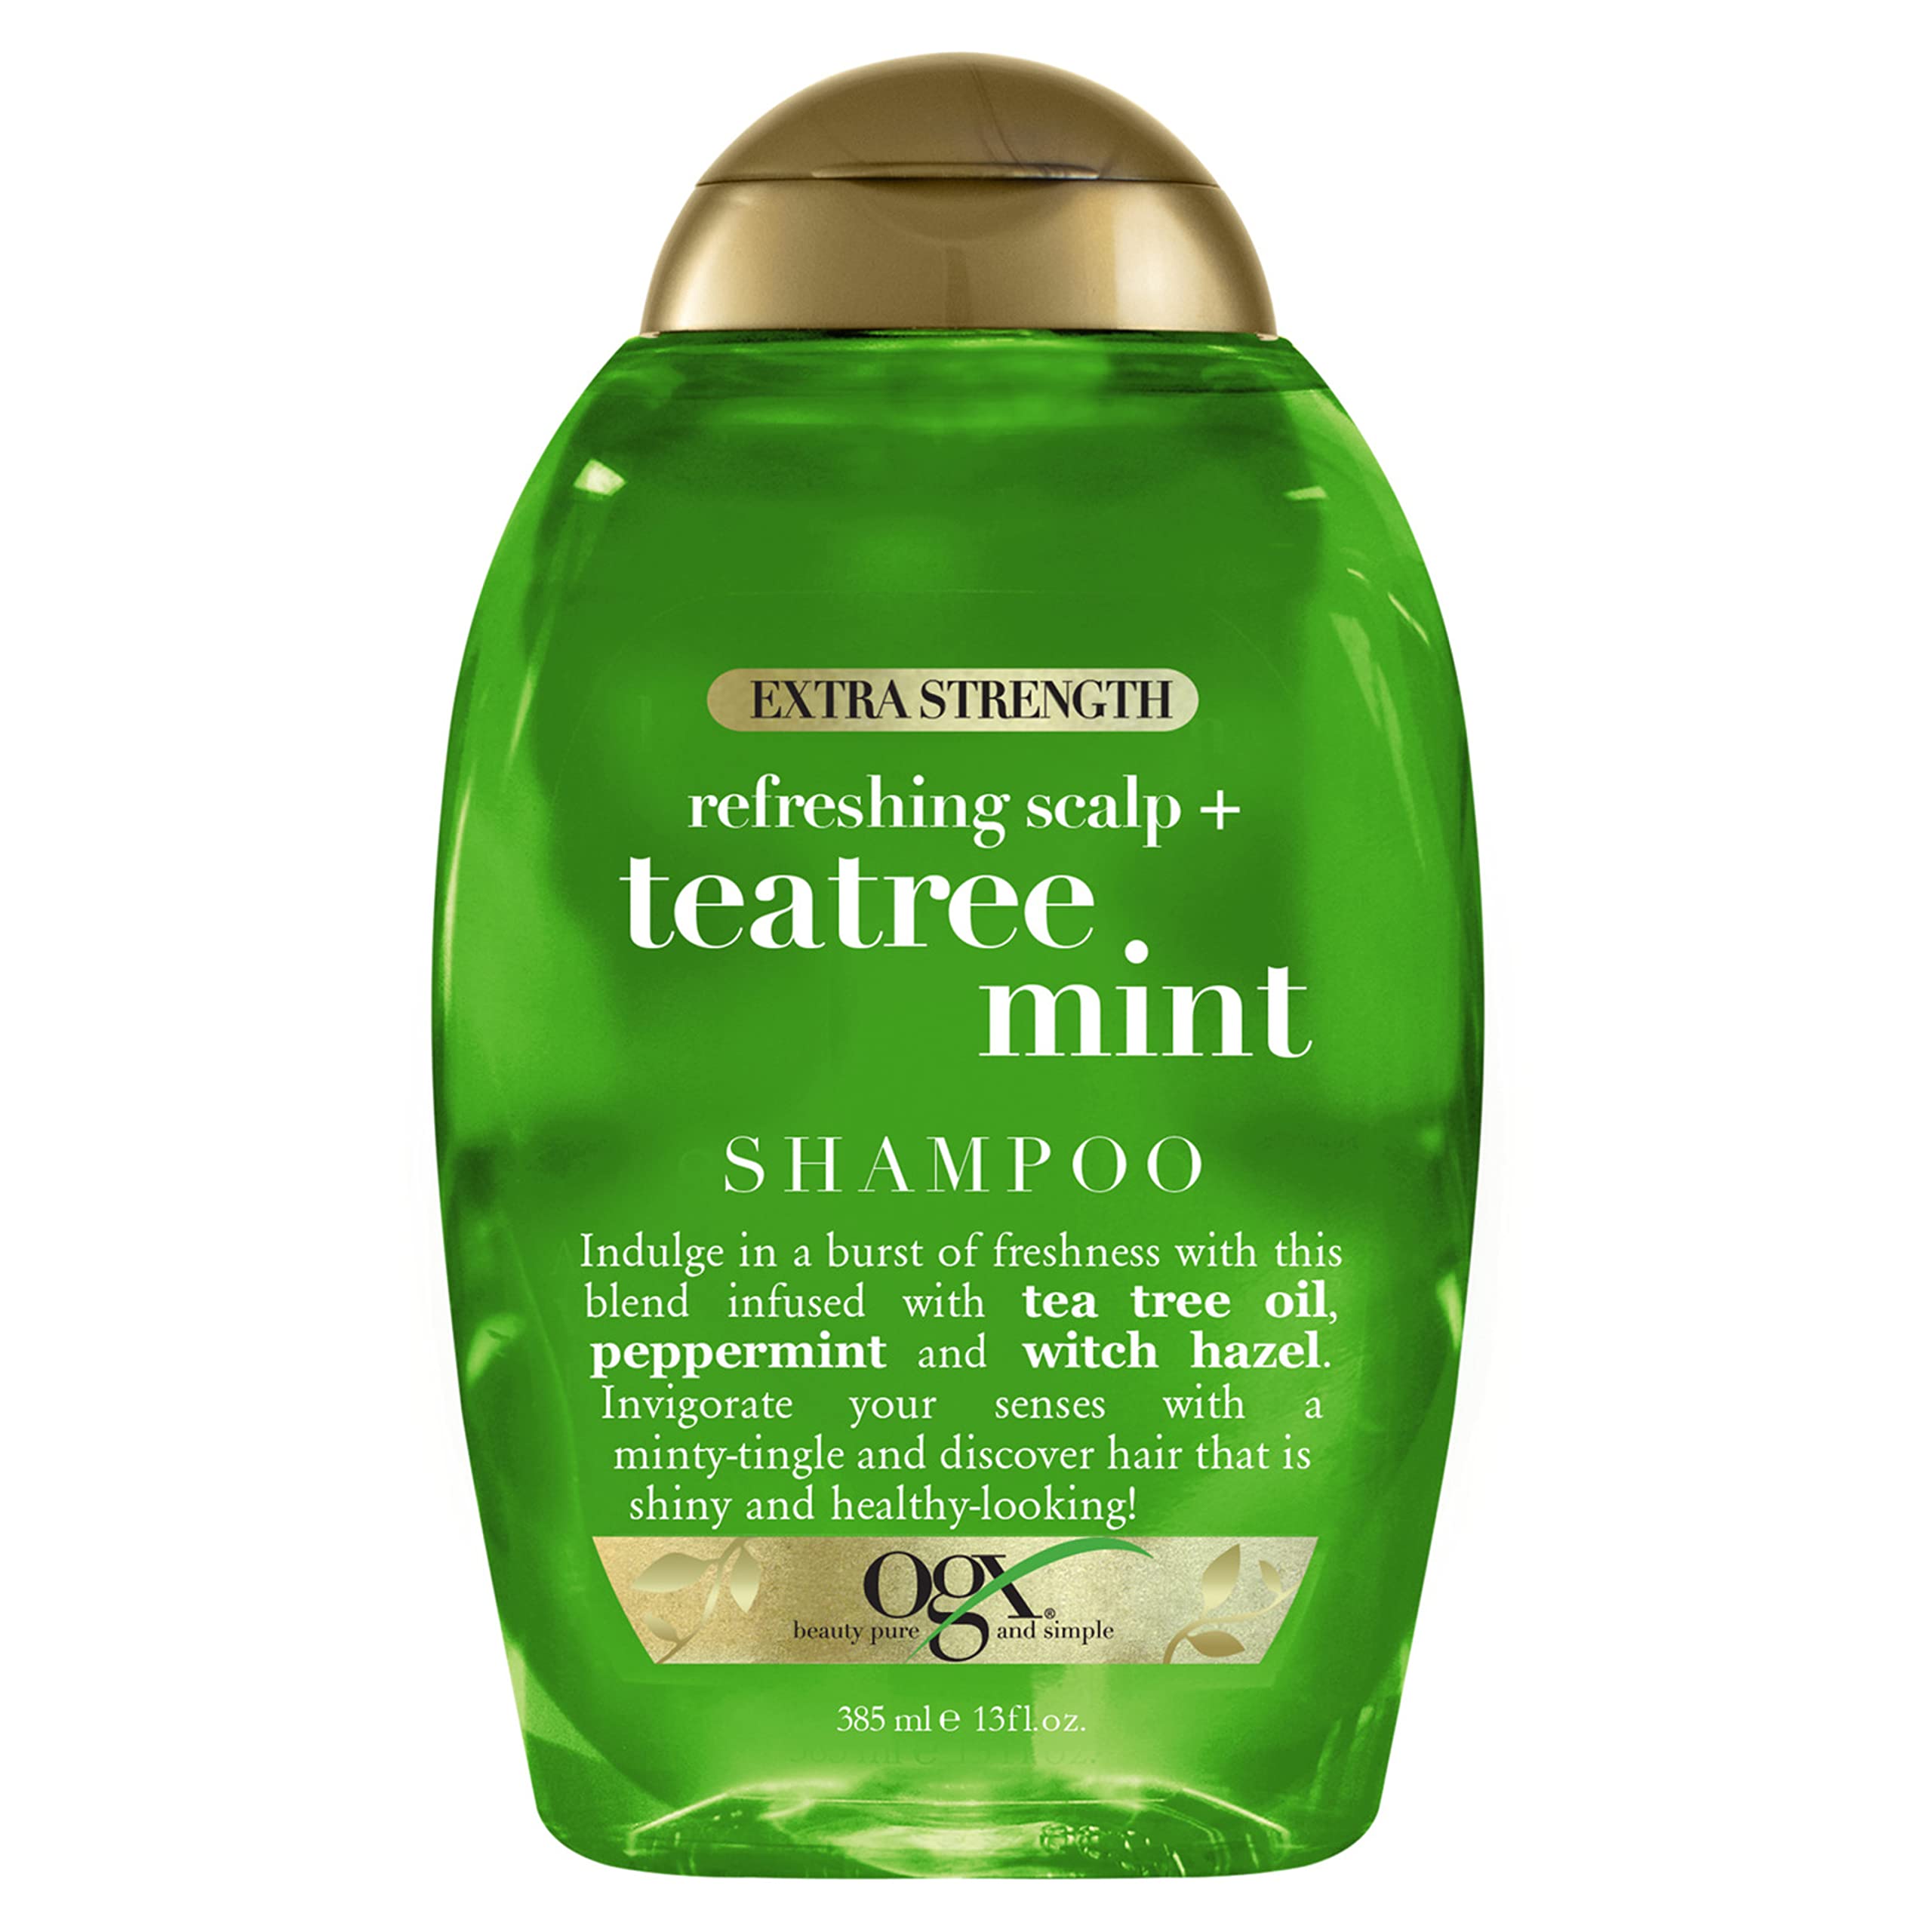 13-Oz OGX Extra Strength Refreshing Scalp + Teatree Mint Shampoo $4.30 w/ S&S + Free Shipping w/ Prime or on $25+